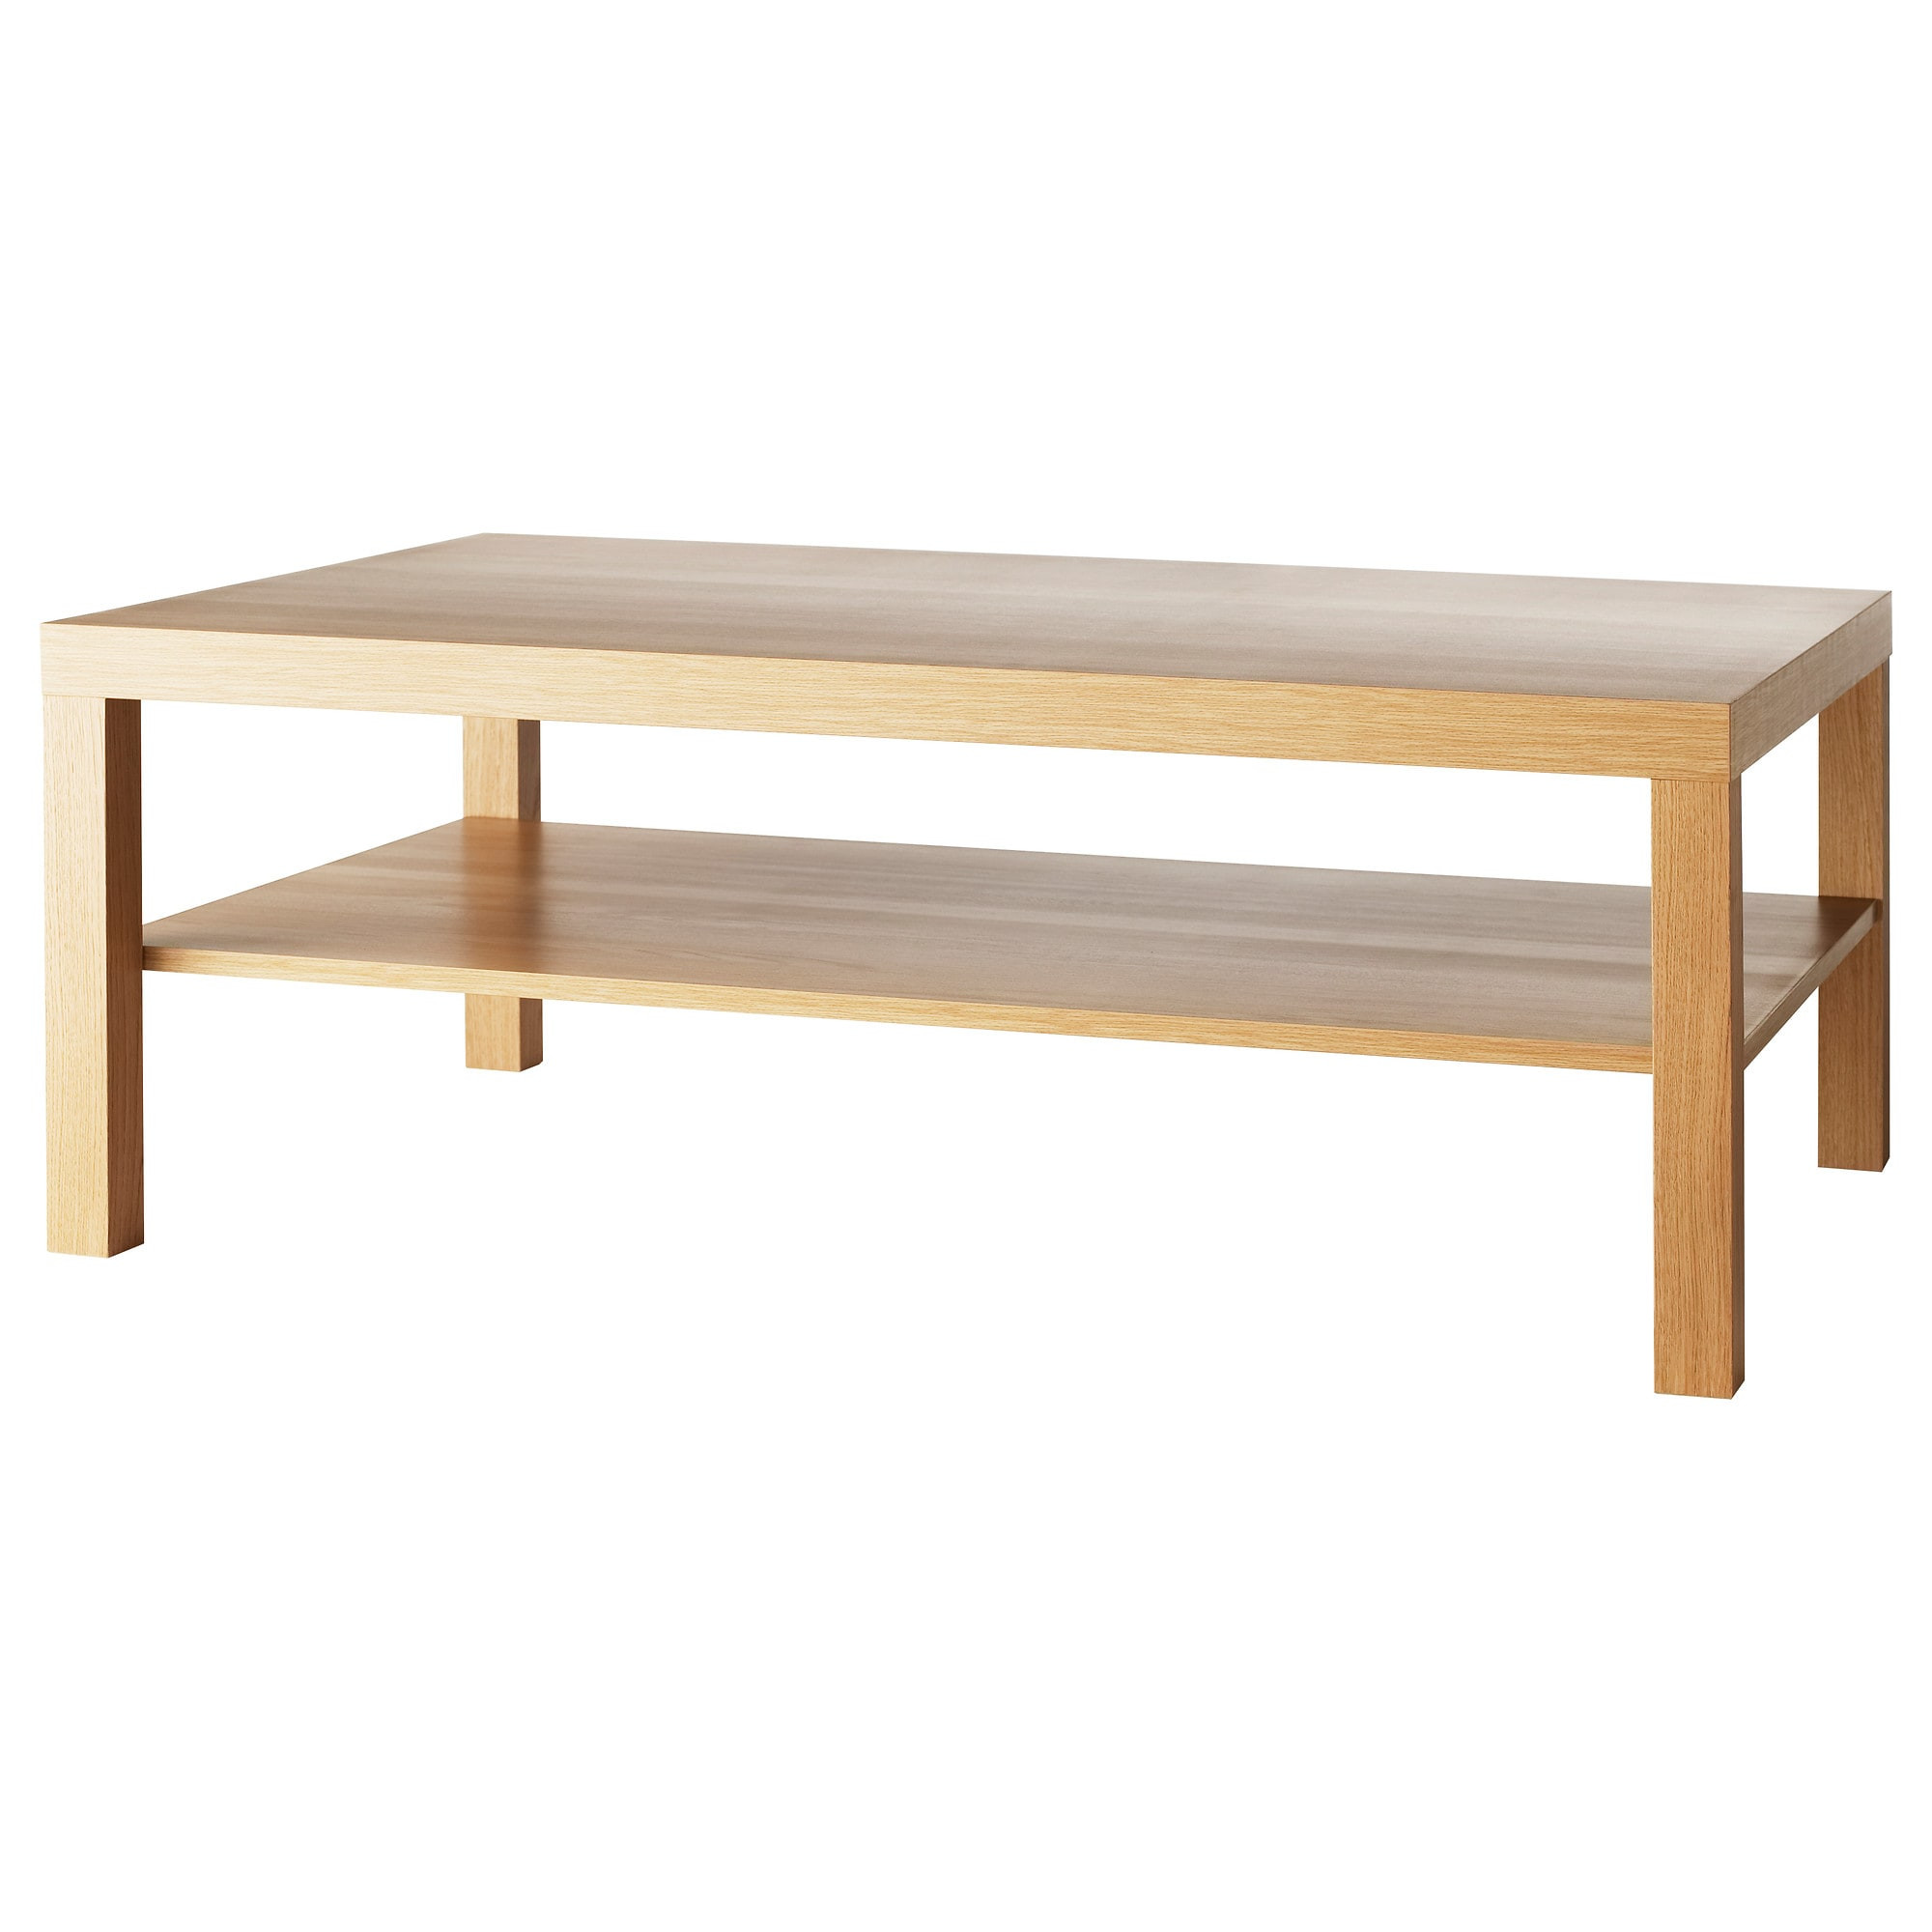 Best ideas about Ikea Lack Coffee Table
. Save or Pin LACK Coffee table Oak effect 118 x 78 cm IKEA Now.